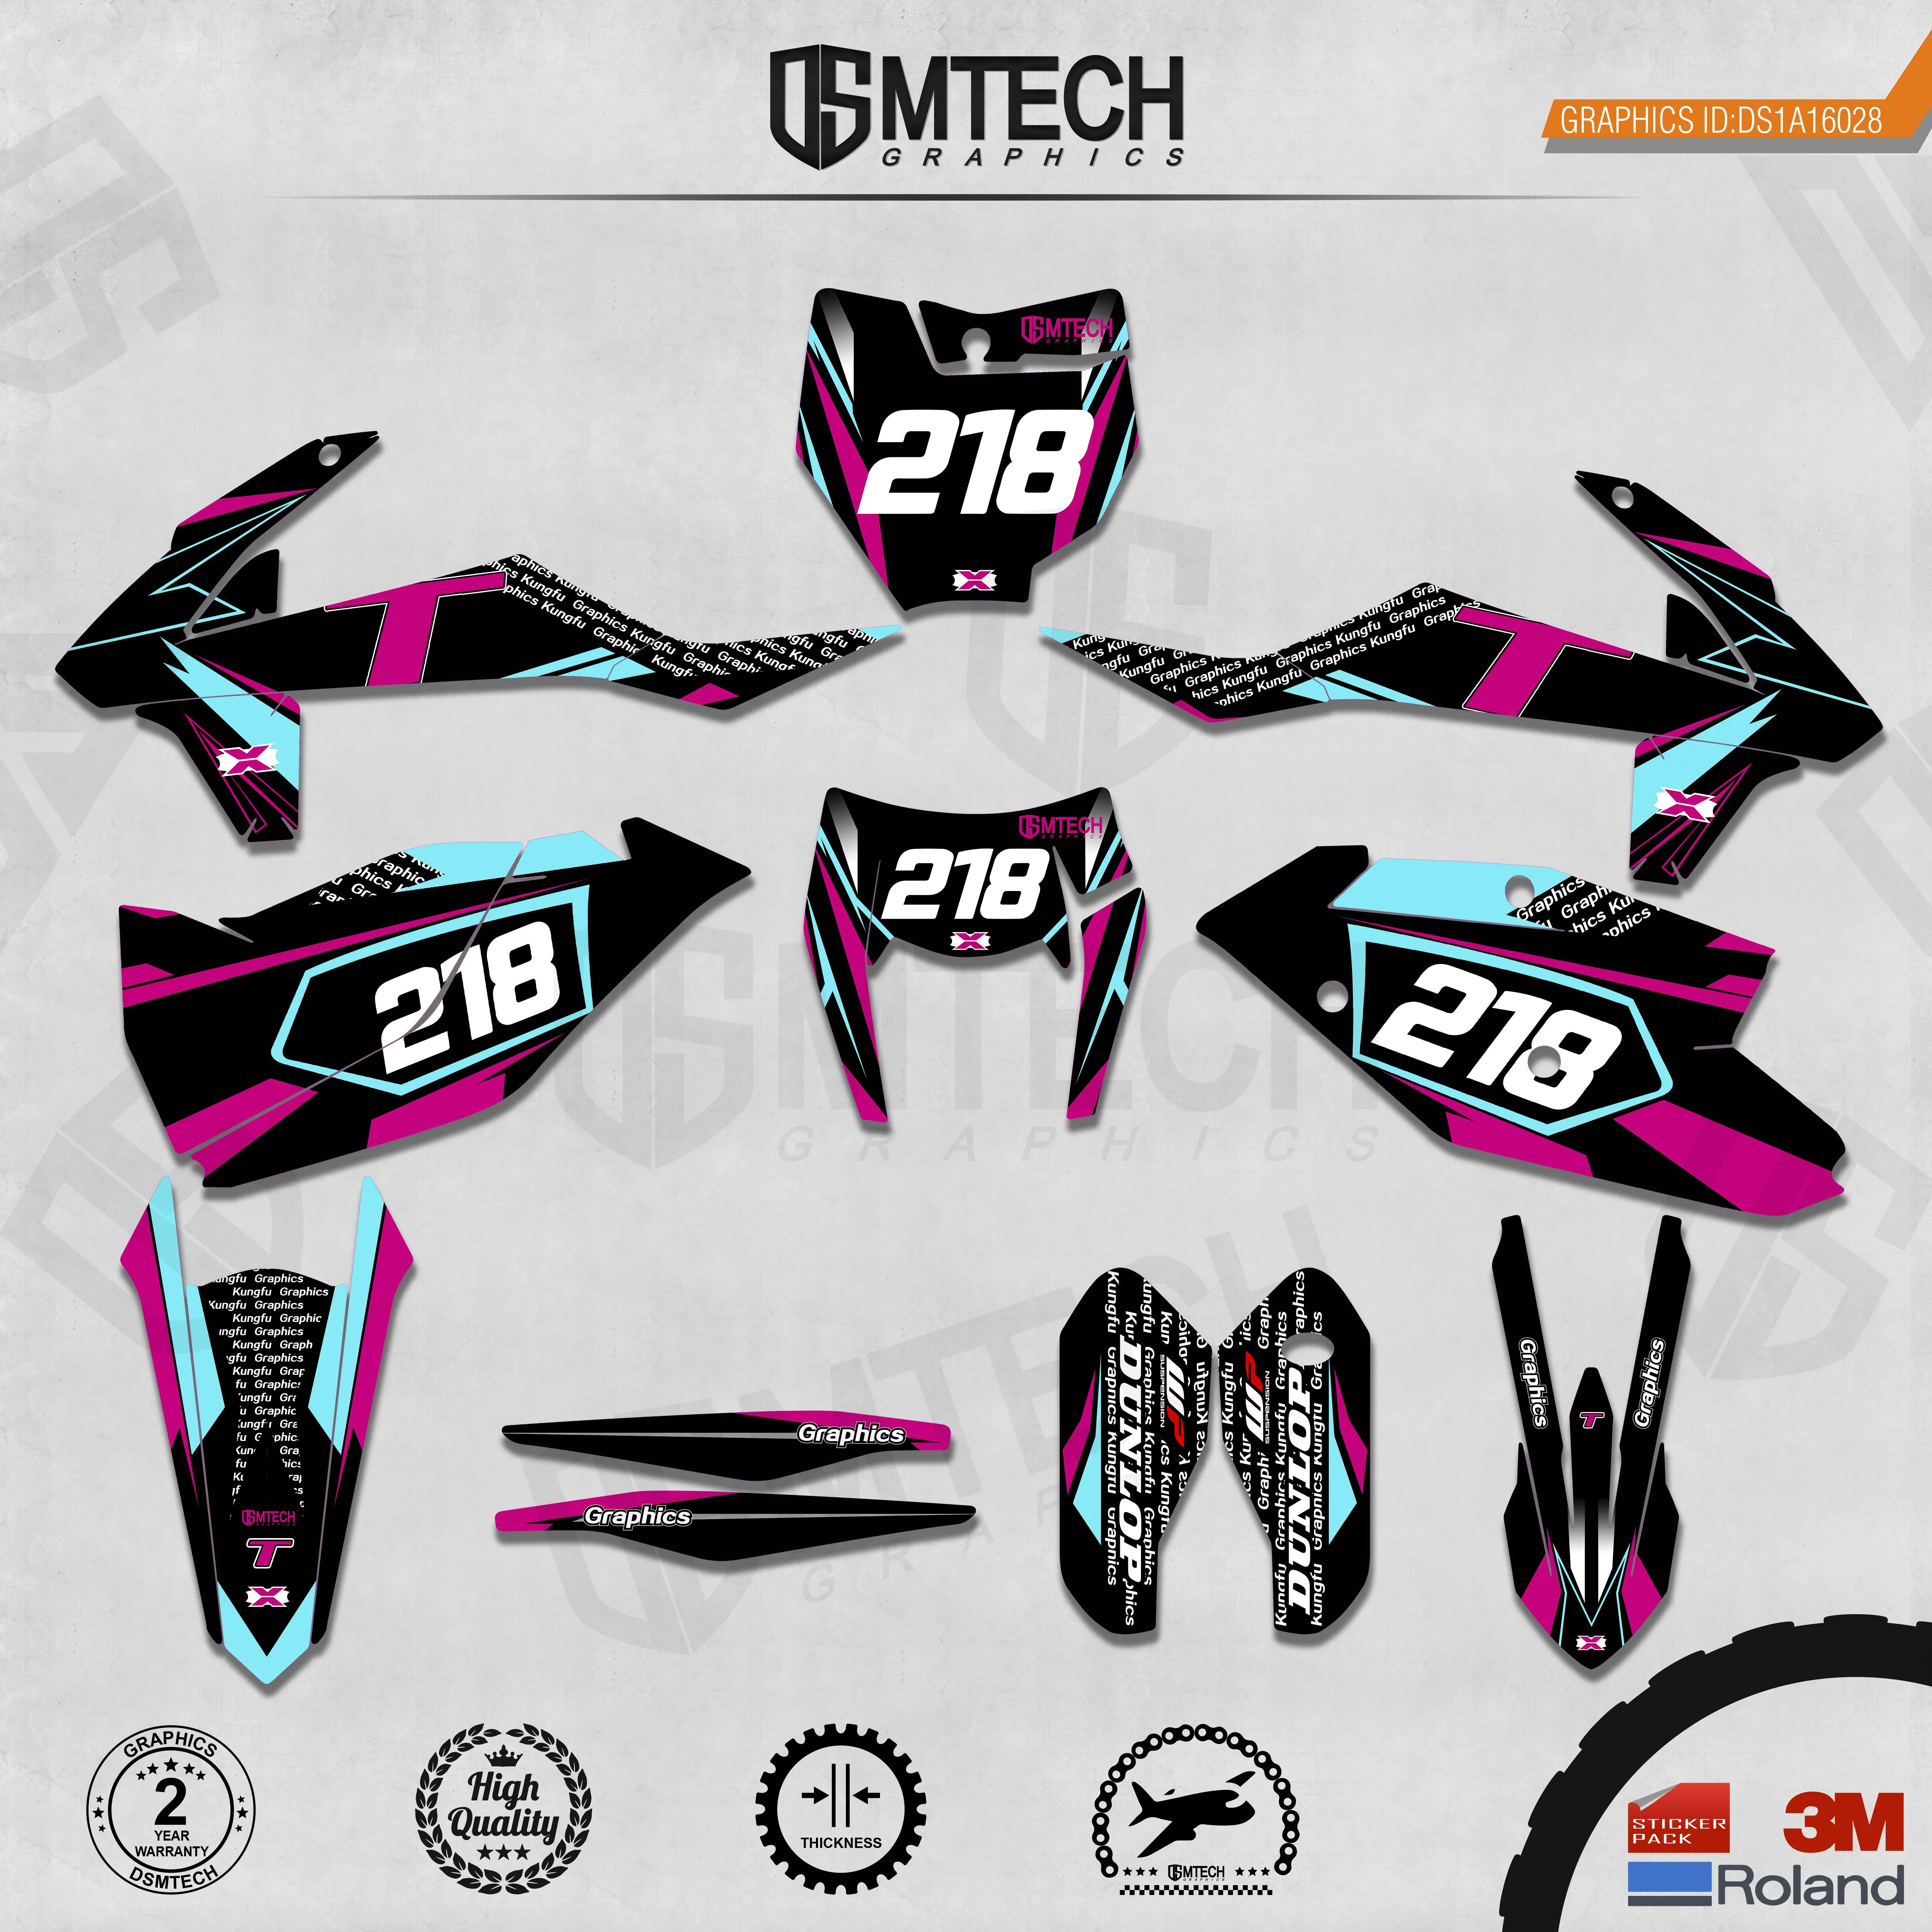 DSMTECH Customized Team Graphics Backgrounds Decals 3M Custom Stickers For KTM 2017-2019 EXC 2016-2018 SXF  028